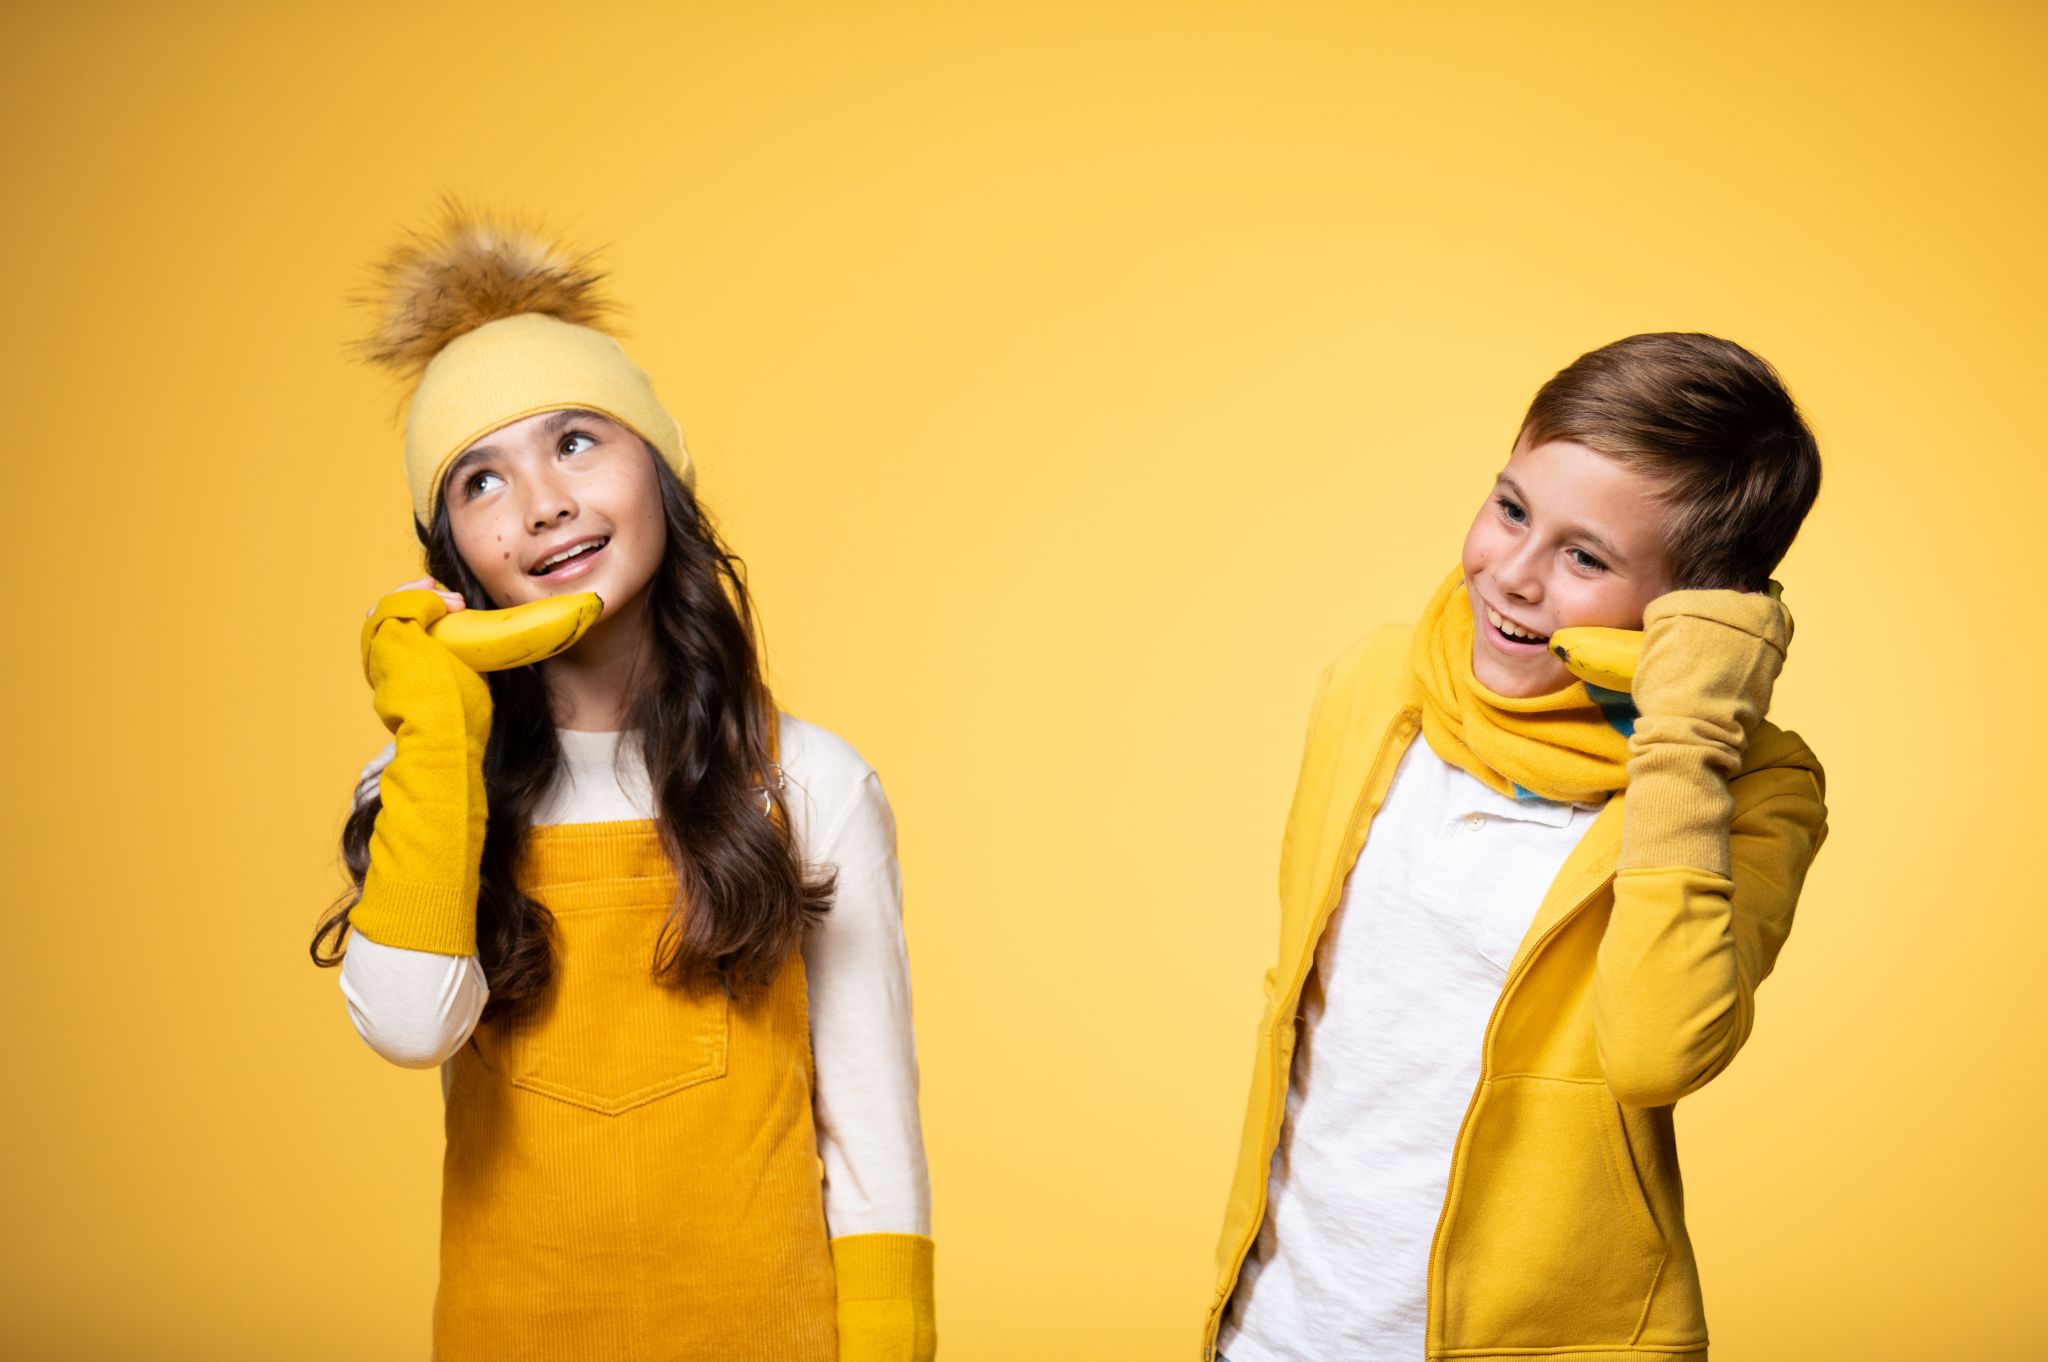 Boy model wearing a yellow scarf. jacket and white top and girl model wearing a yellow headband, hand sleeves and overalls as well as white top posing for the camera both using bananas as phones against a yellow backdrop